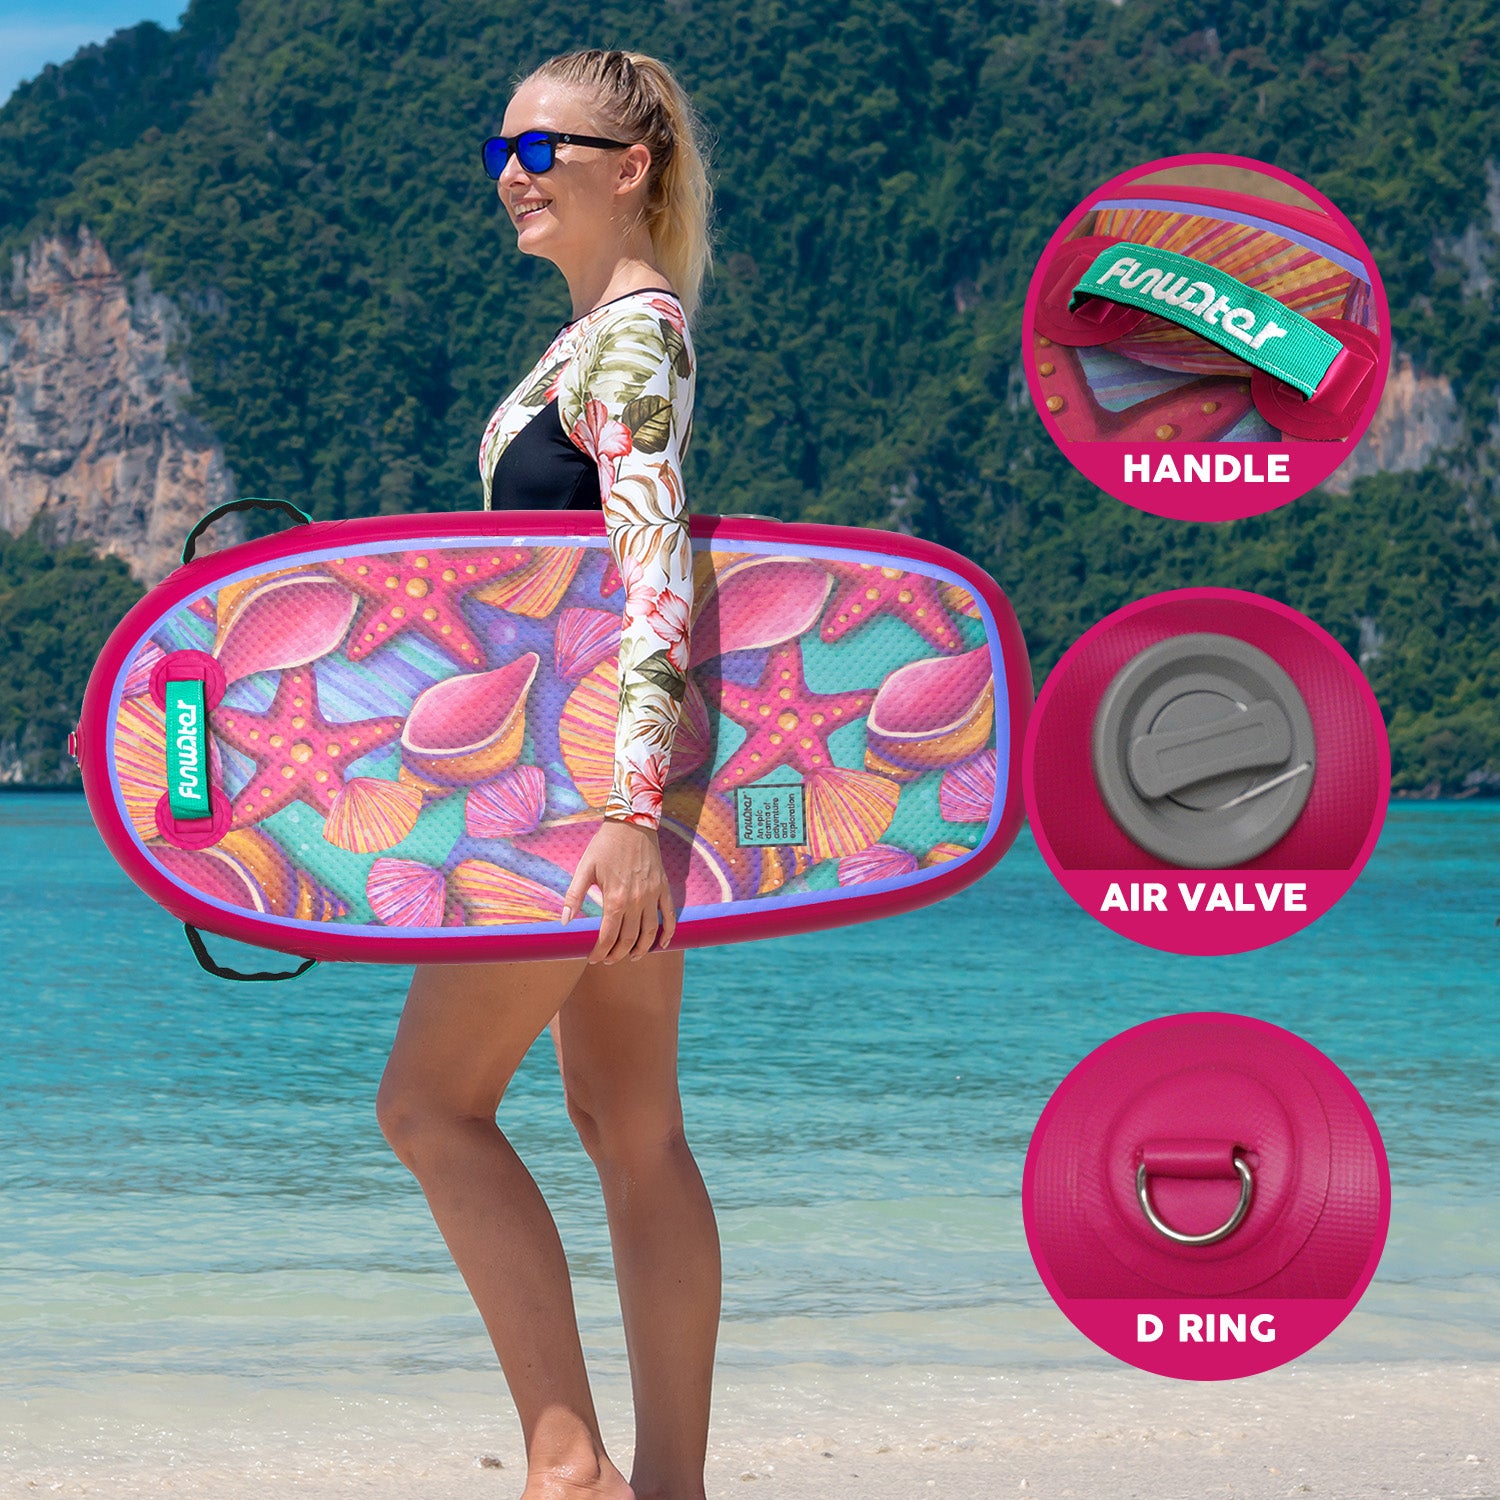 Funwater bodyboard has durable air valve and handle to carry